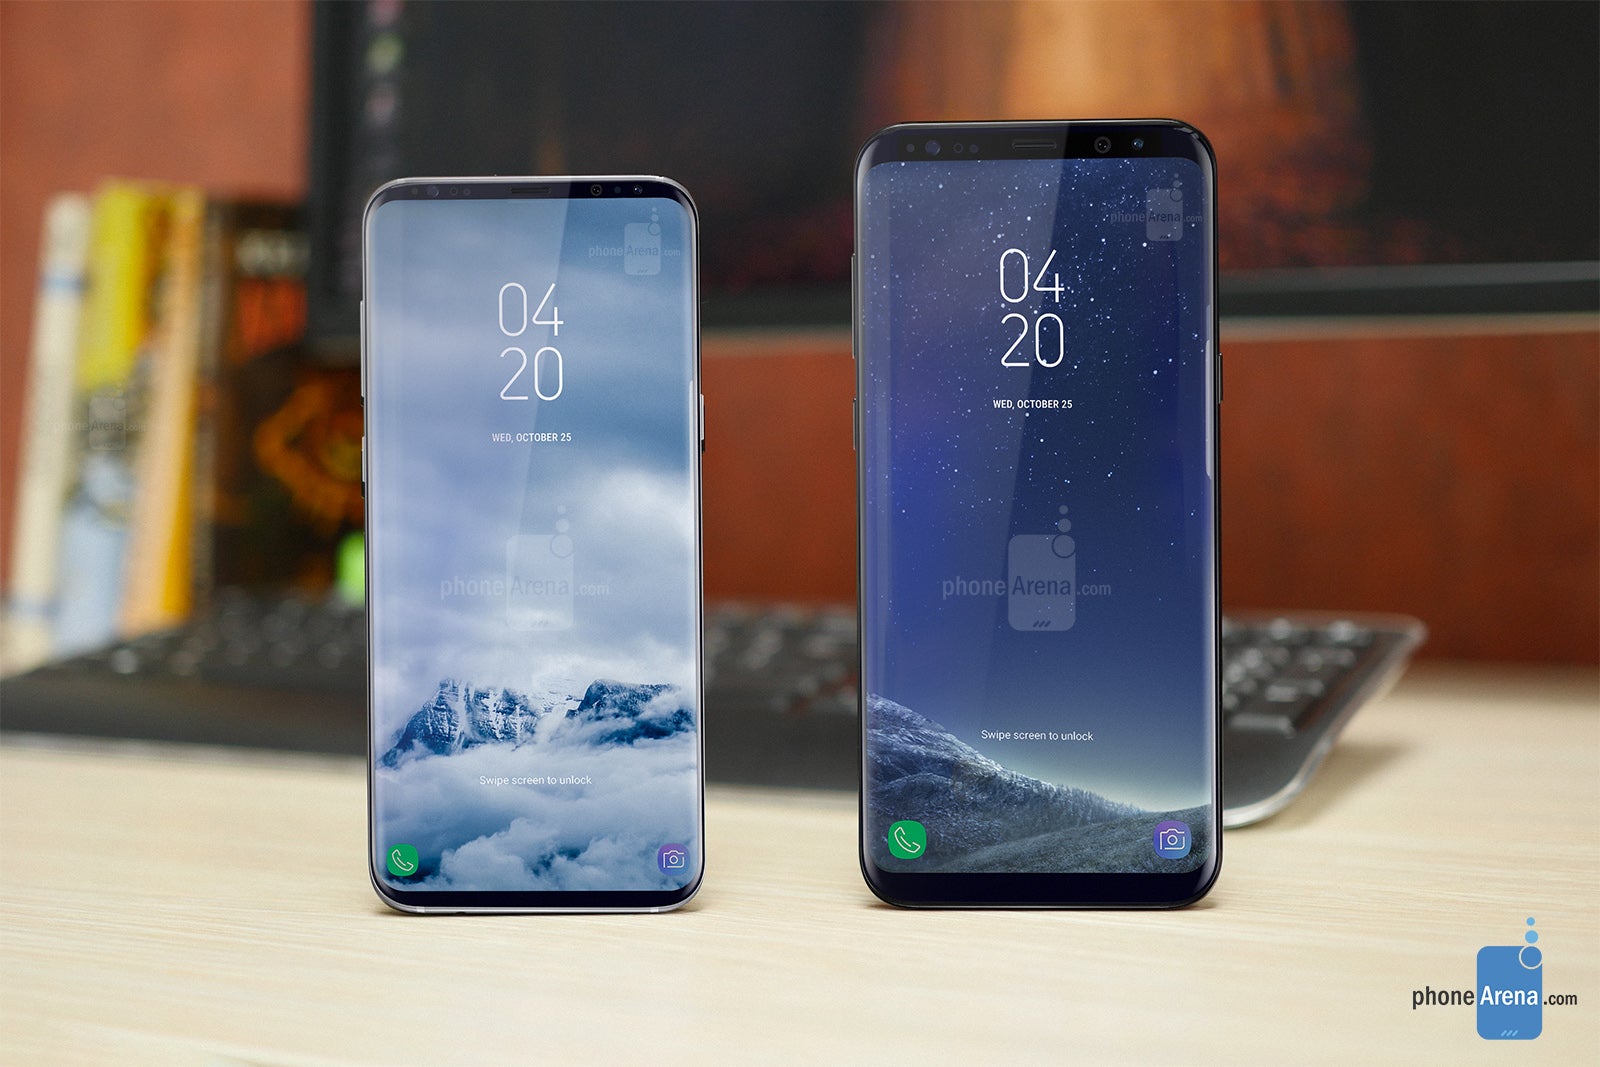 Galaxy S9 concept (left) next to a Galaxy S8+ - Samsung Galaxy S9 rumored to come with improved iris scanner and face recognition